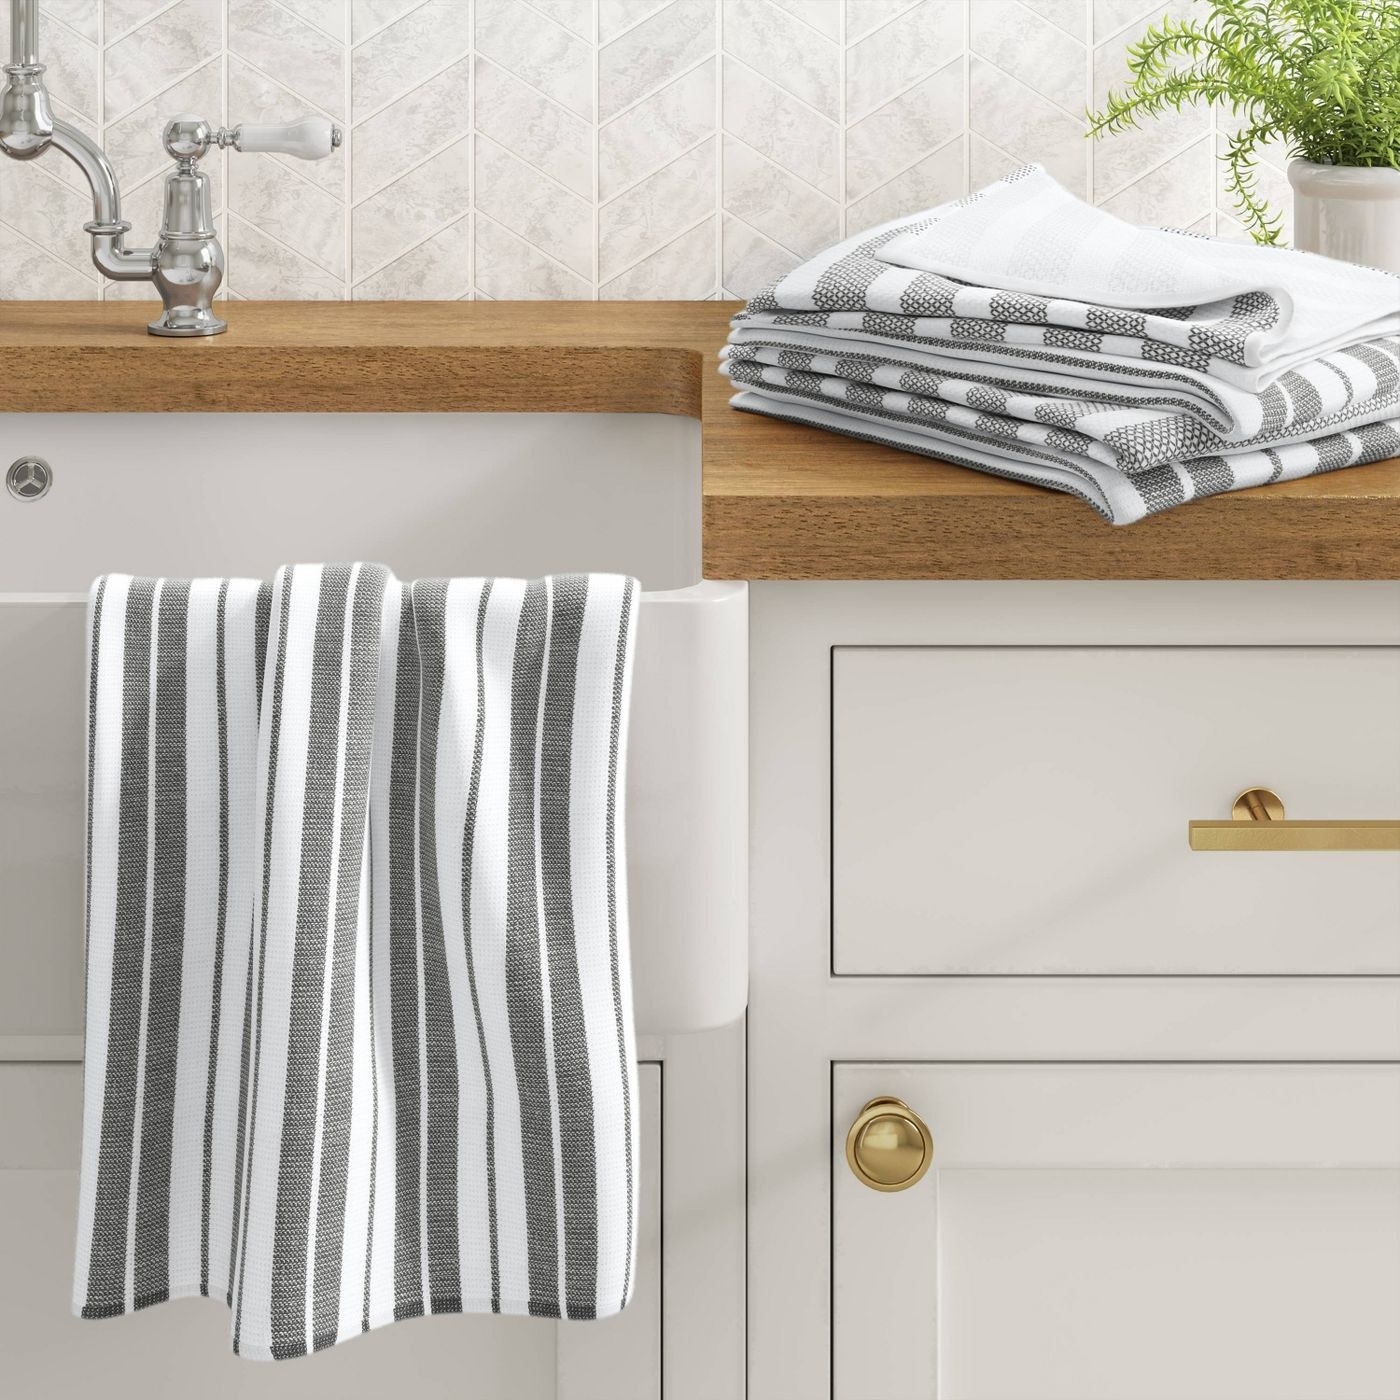 white and grey kitchen towel hanging on the side of a sink and stacked on the counter